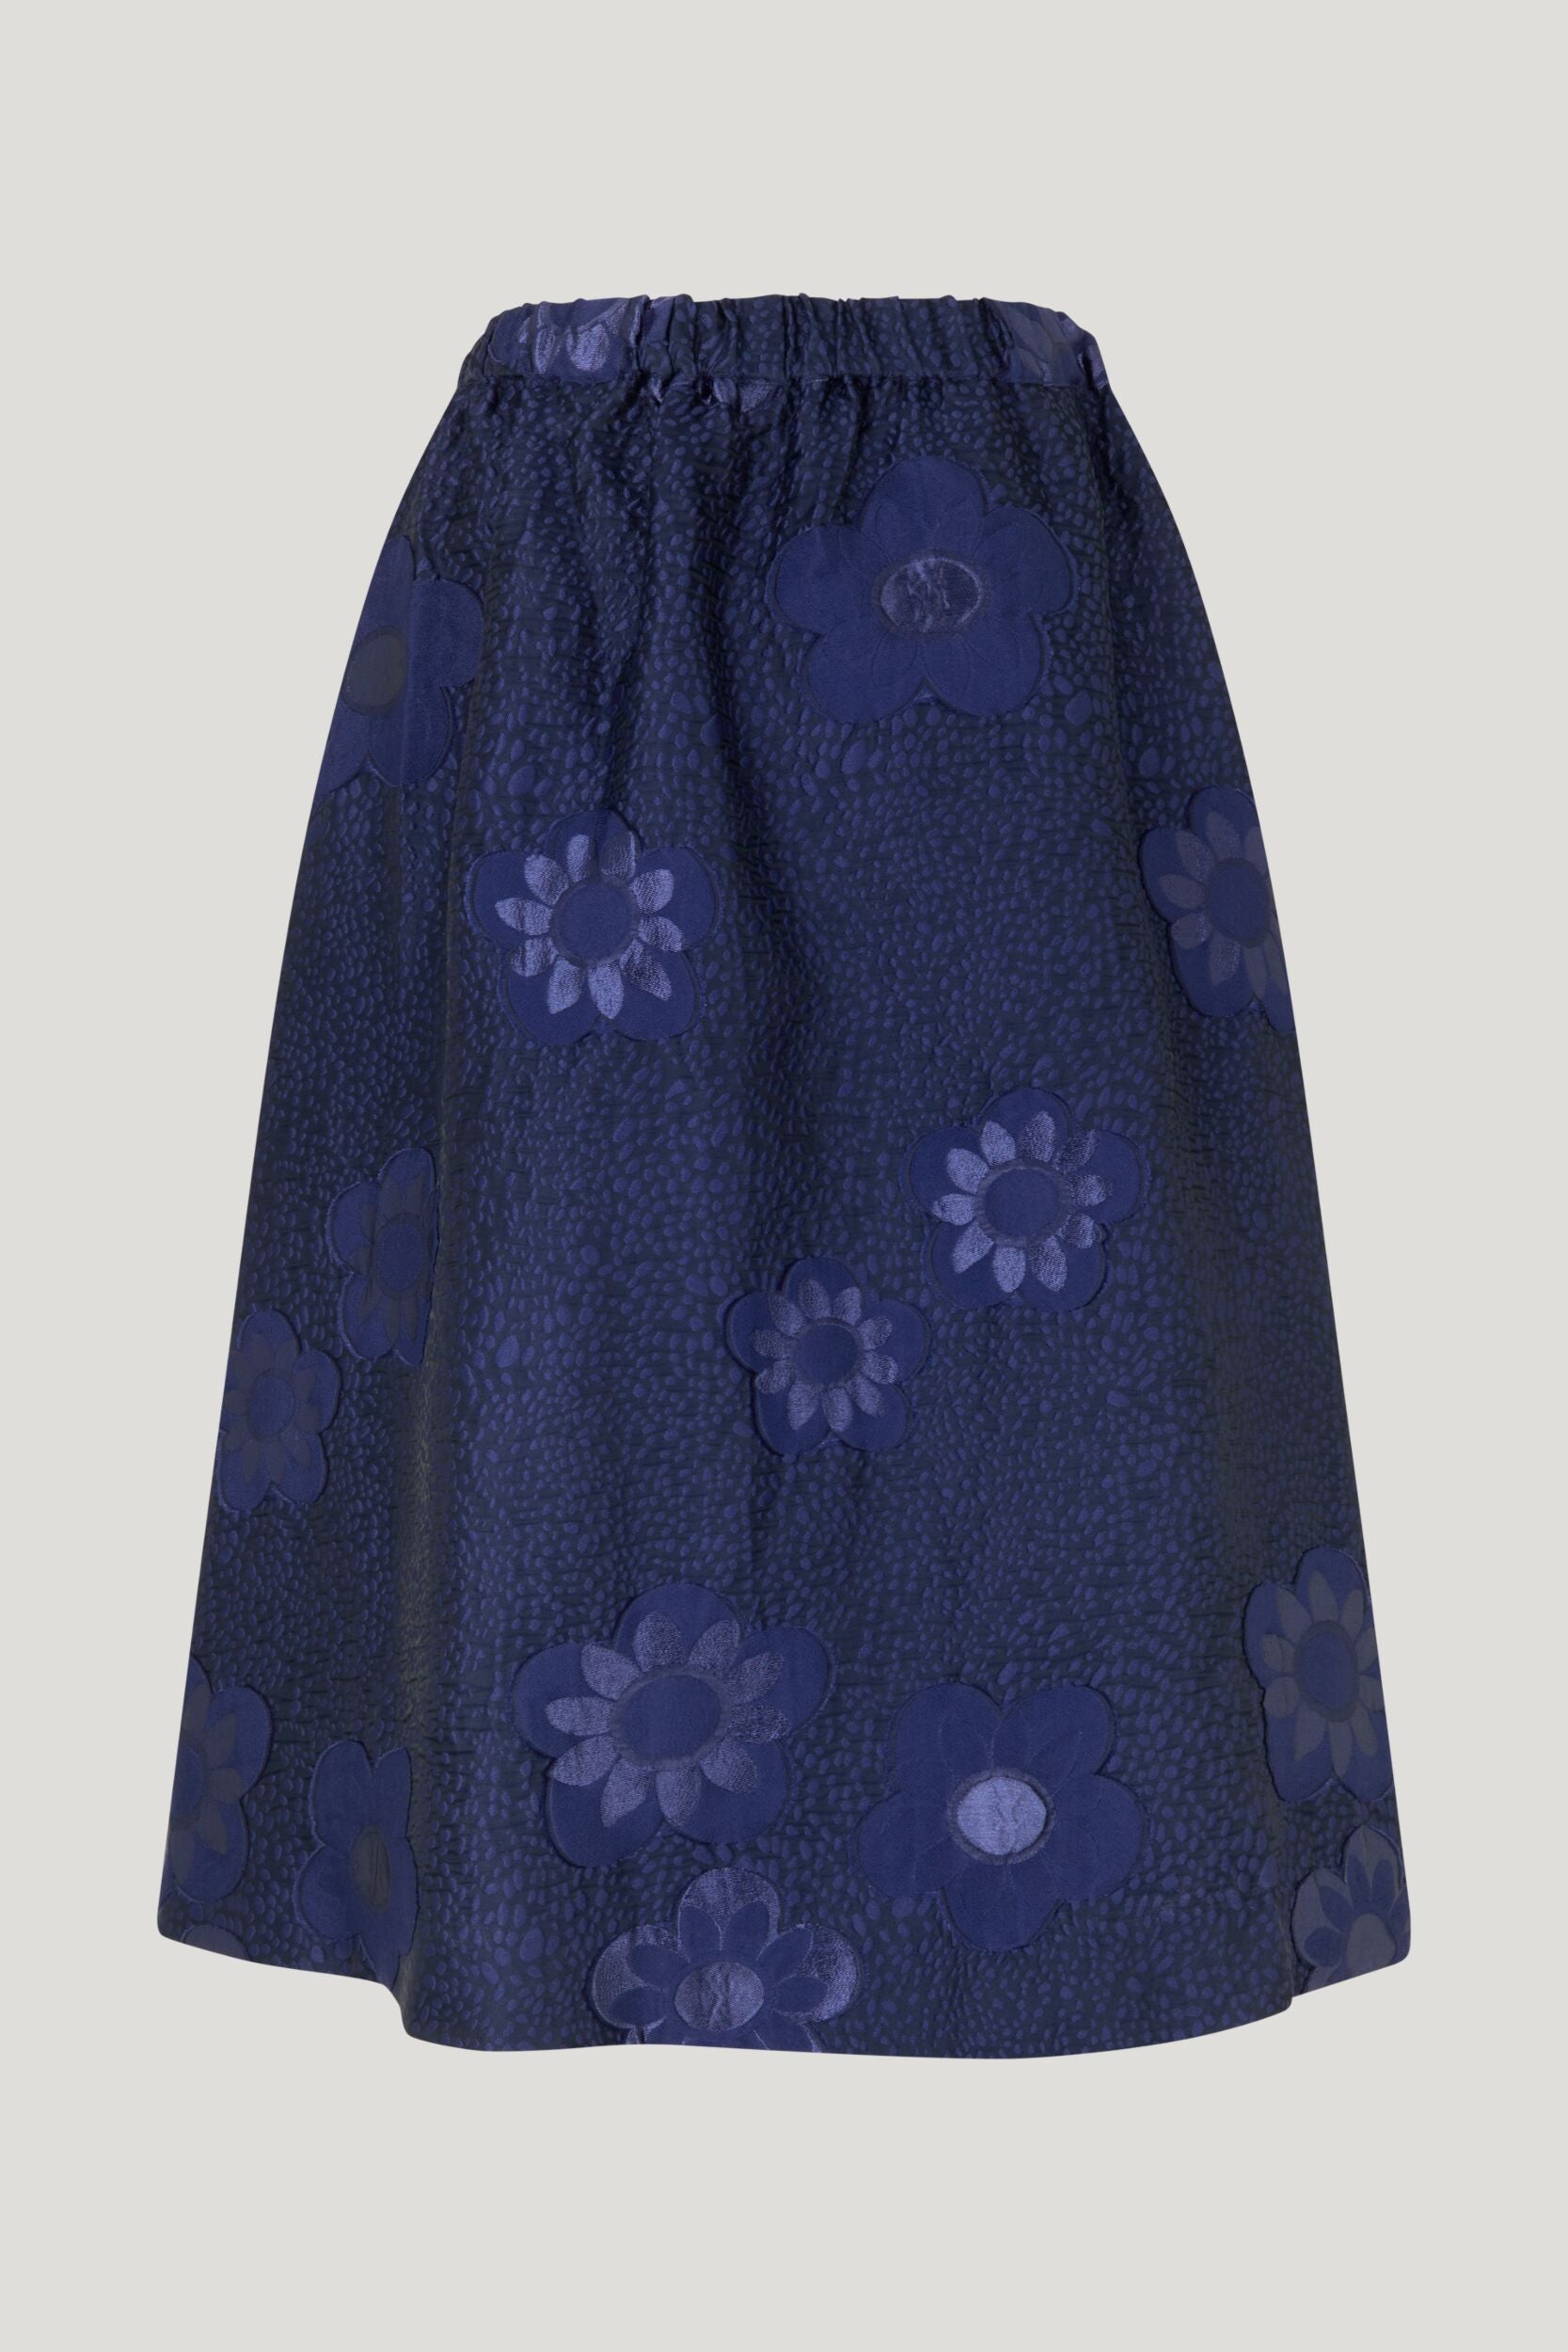 Midi full skirt with elasticated waistband at rear and embroidered flower design throughout